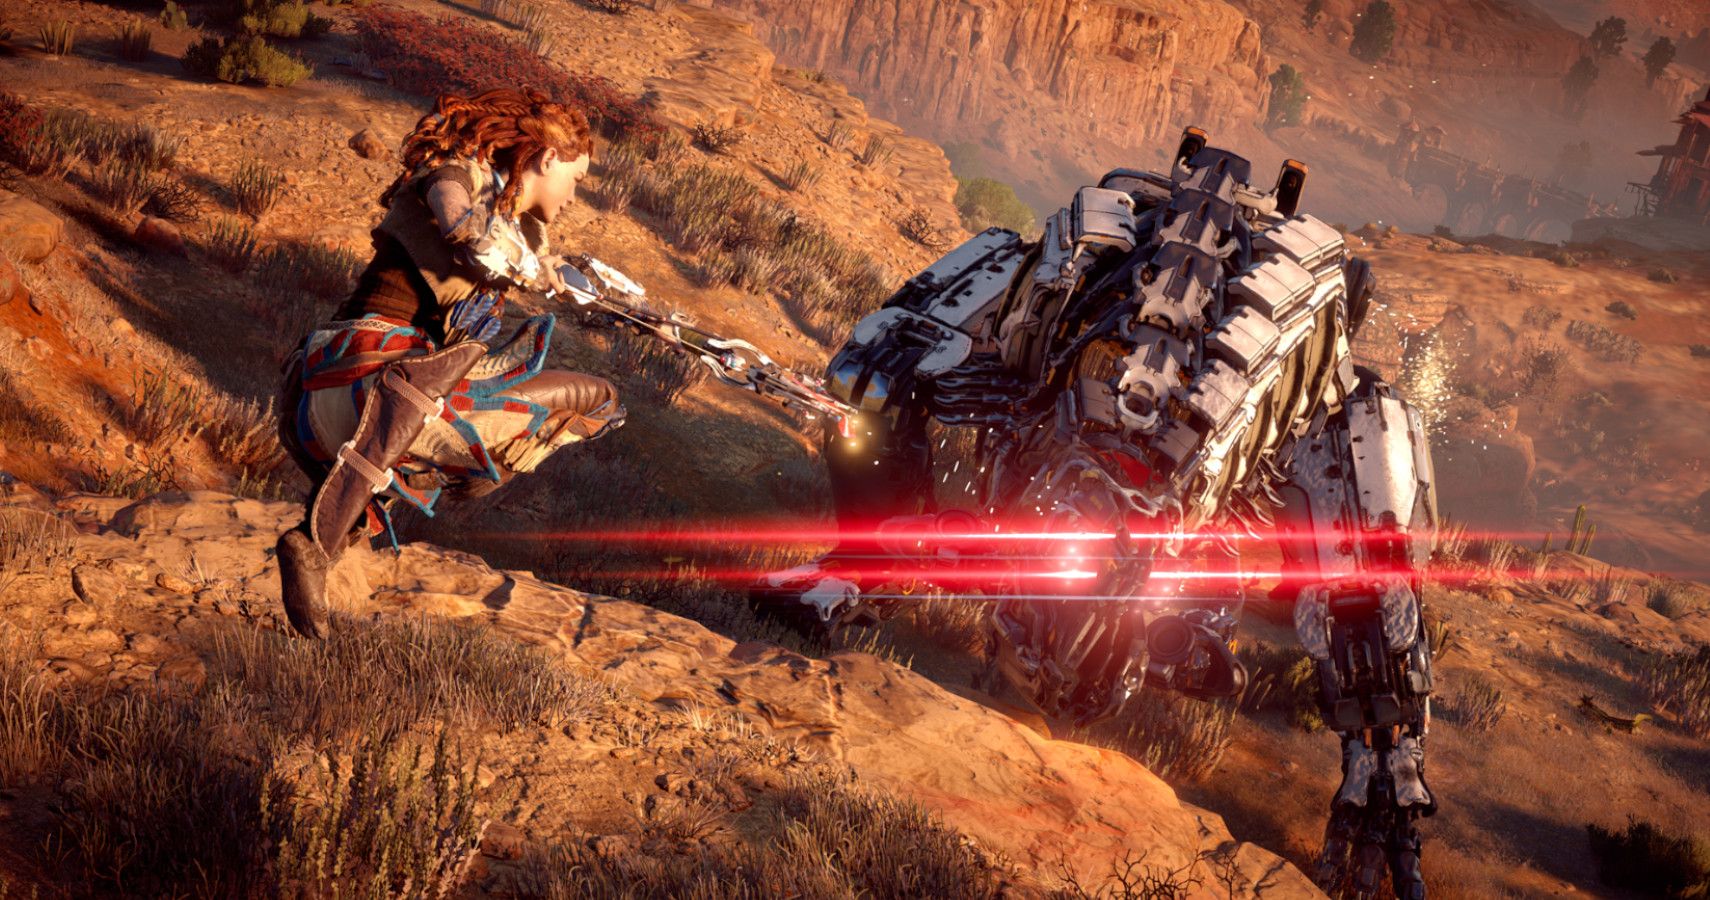 The Best Thing About Horizon Zero Dawn Is The Damage Feedback